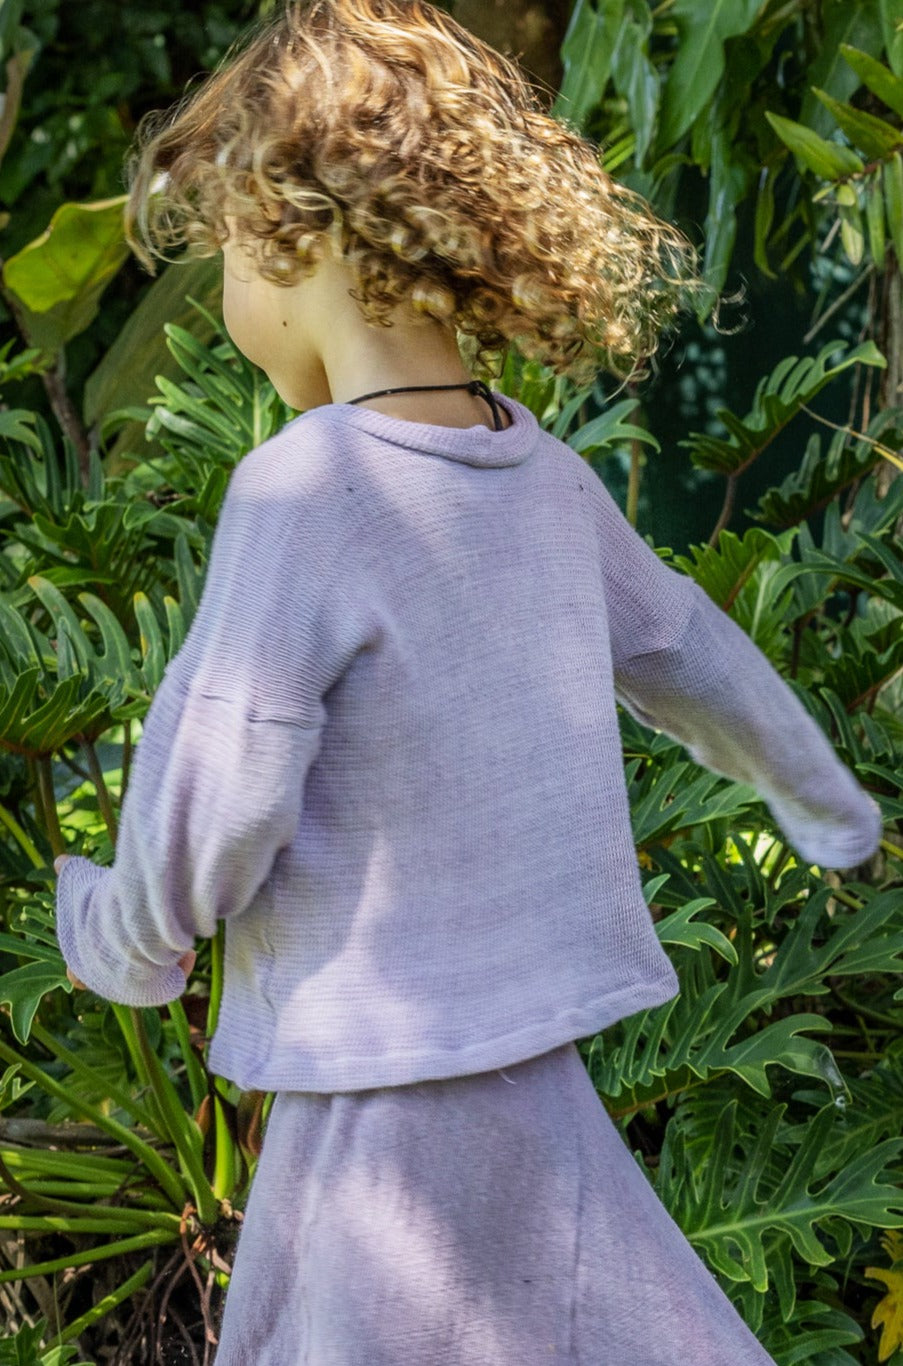 WILLOW SWEATER - Lilac